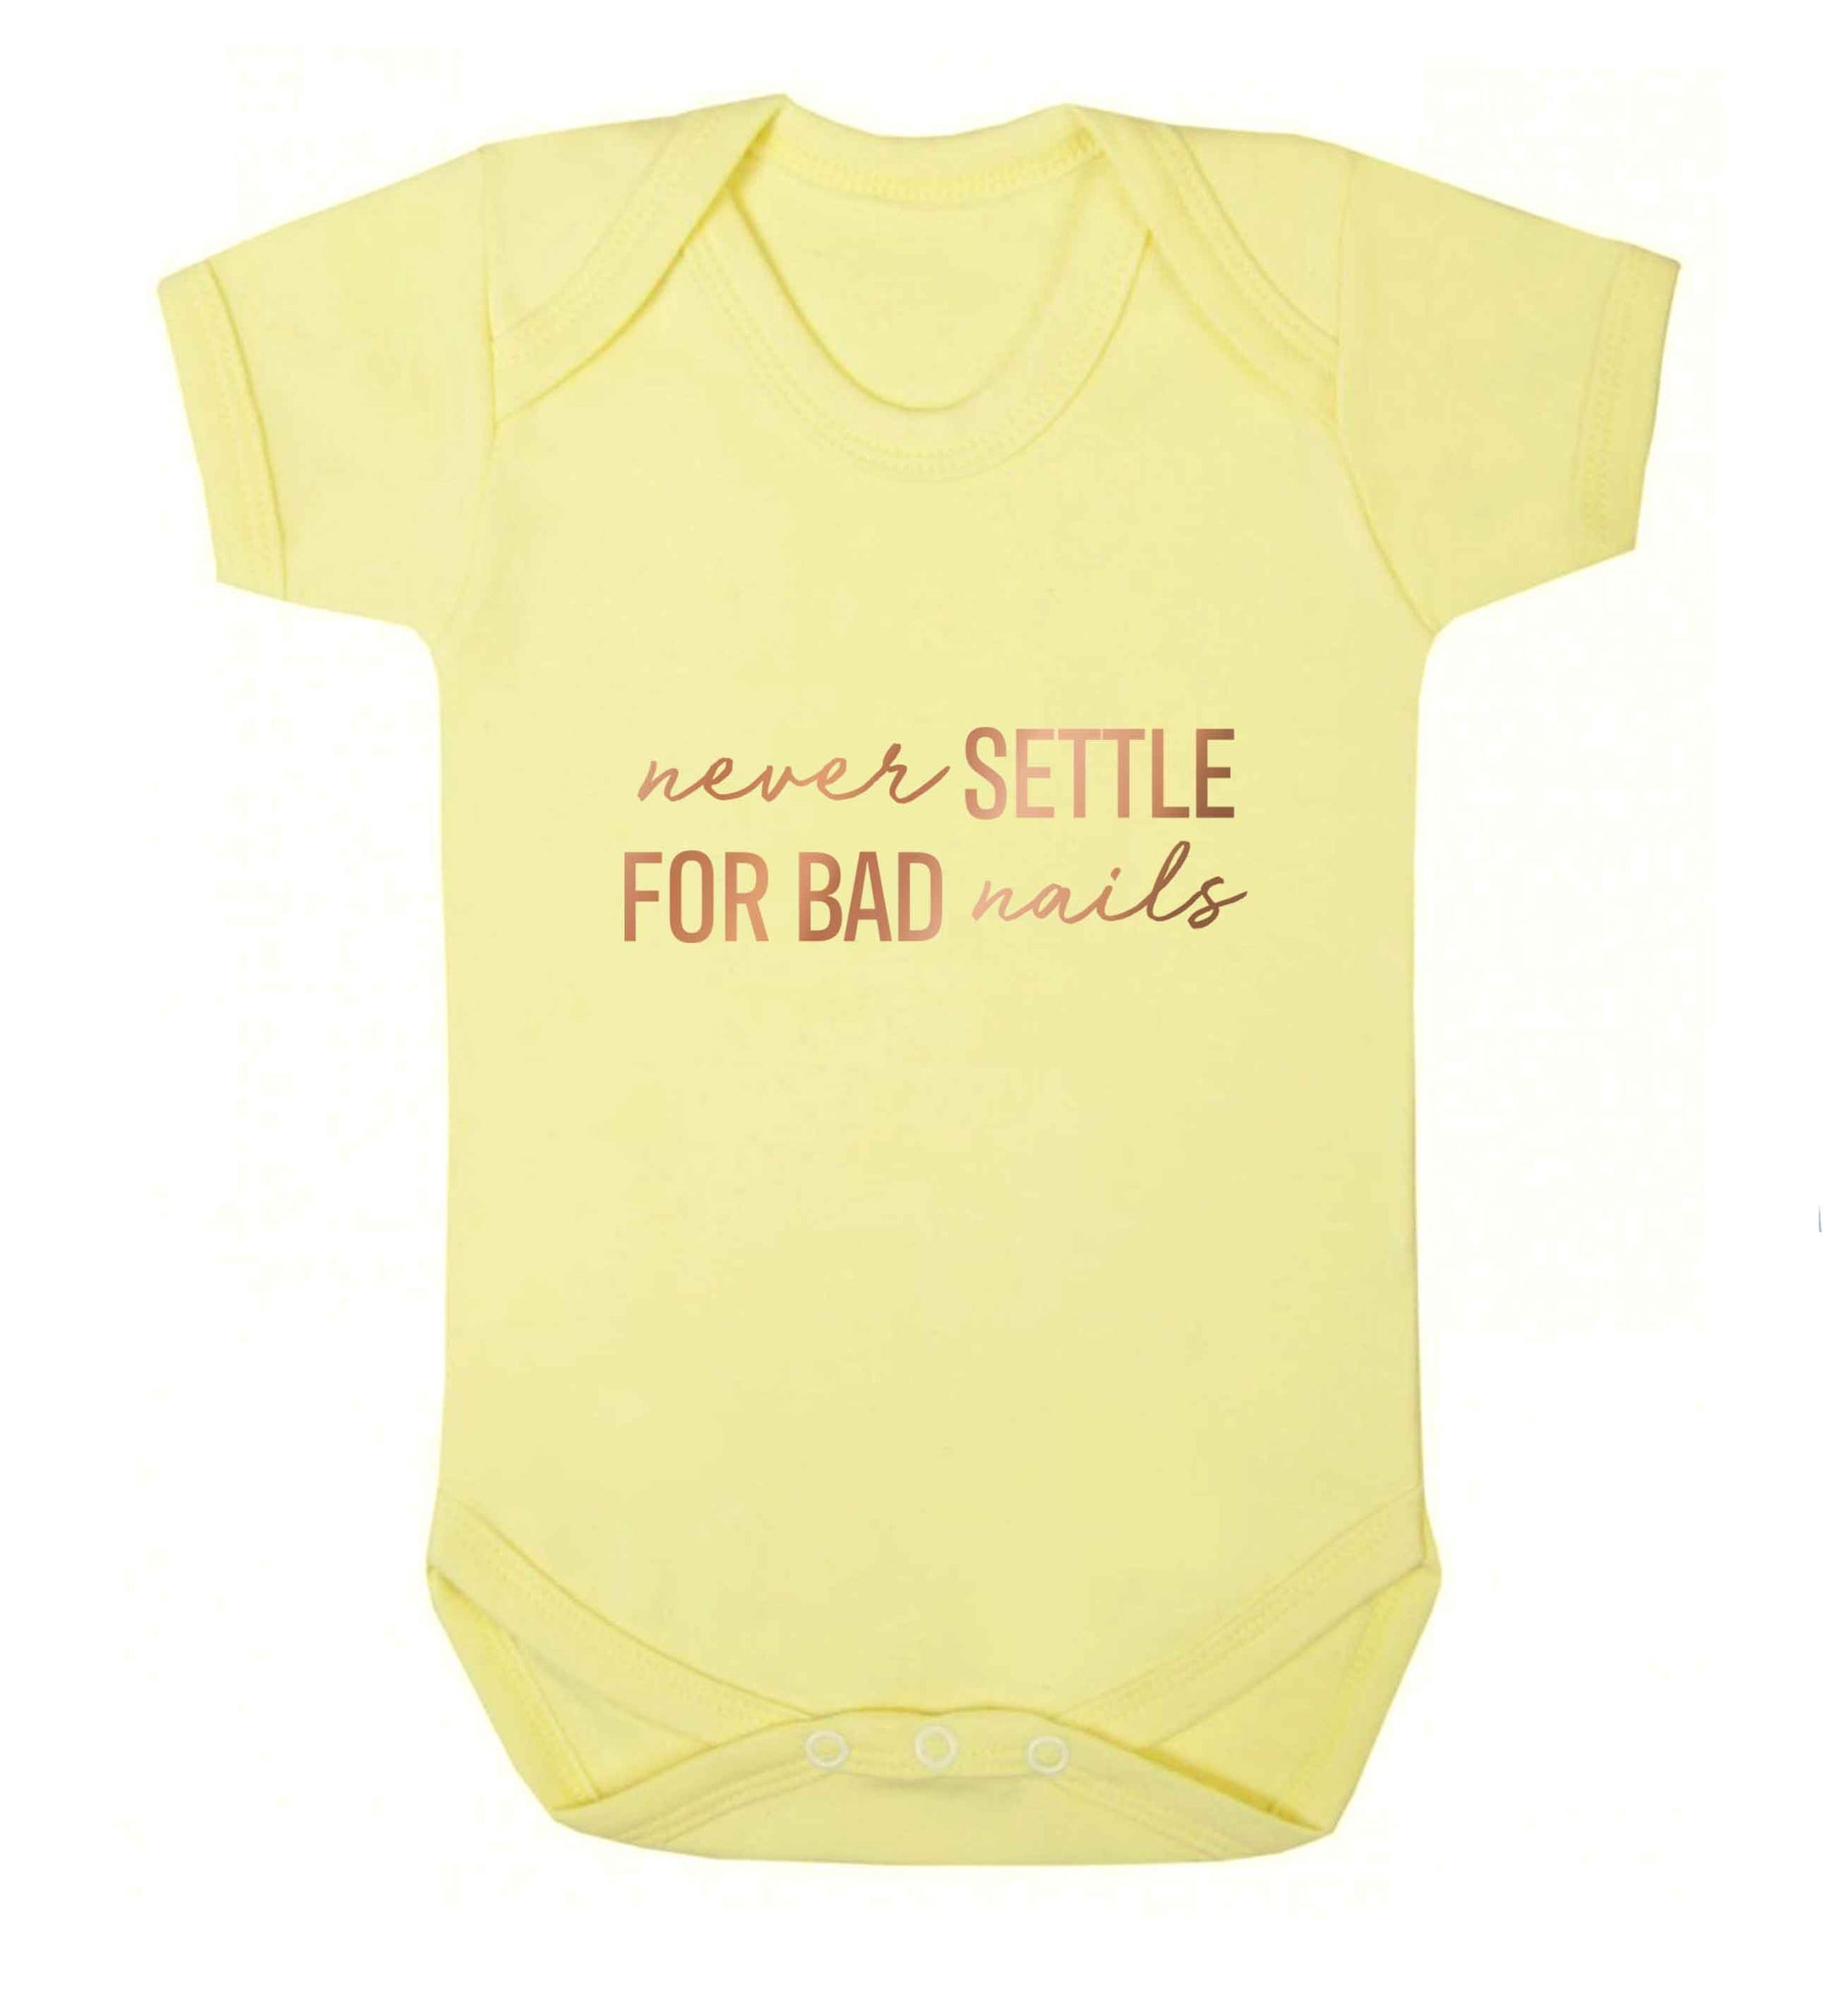 Never settle for bad nails - rose gold baby vest pale yellow 18-24 months